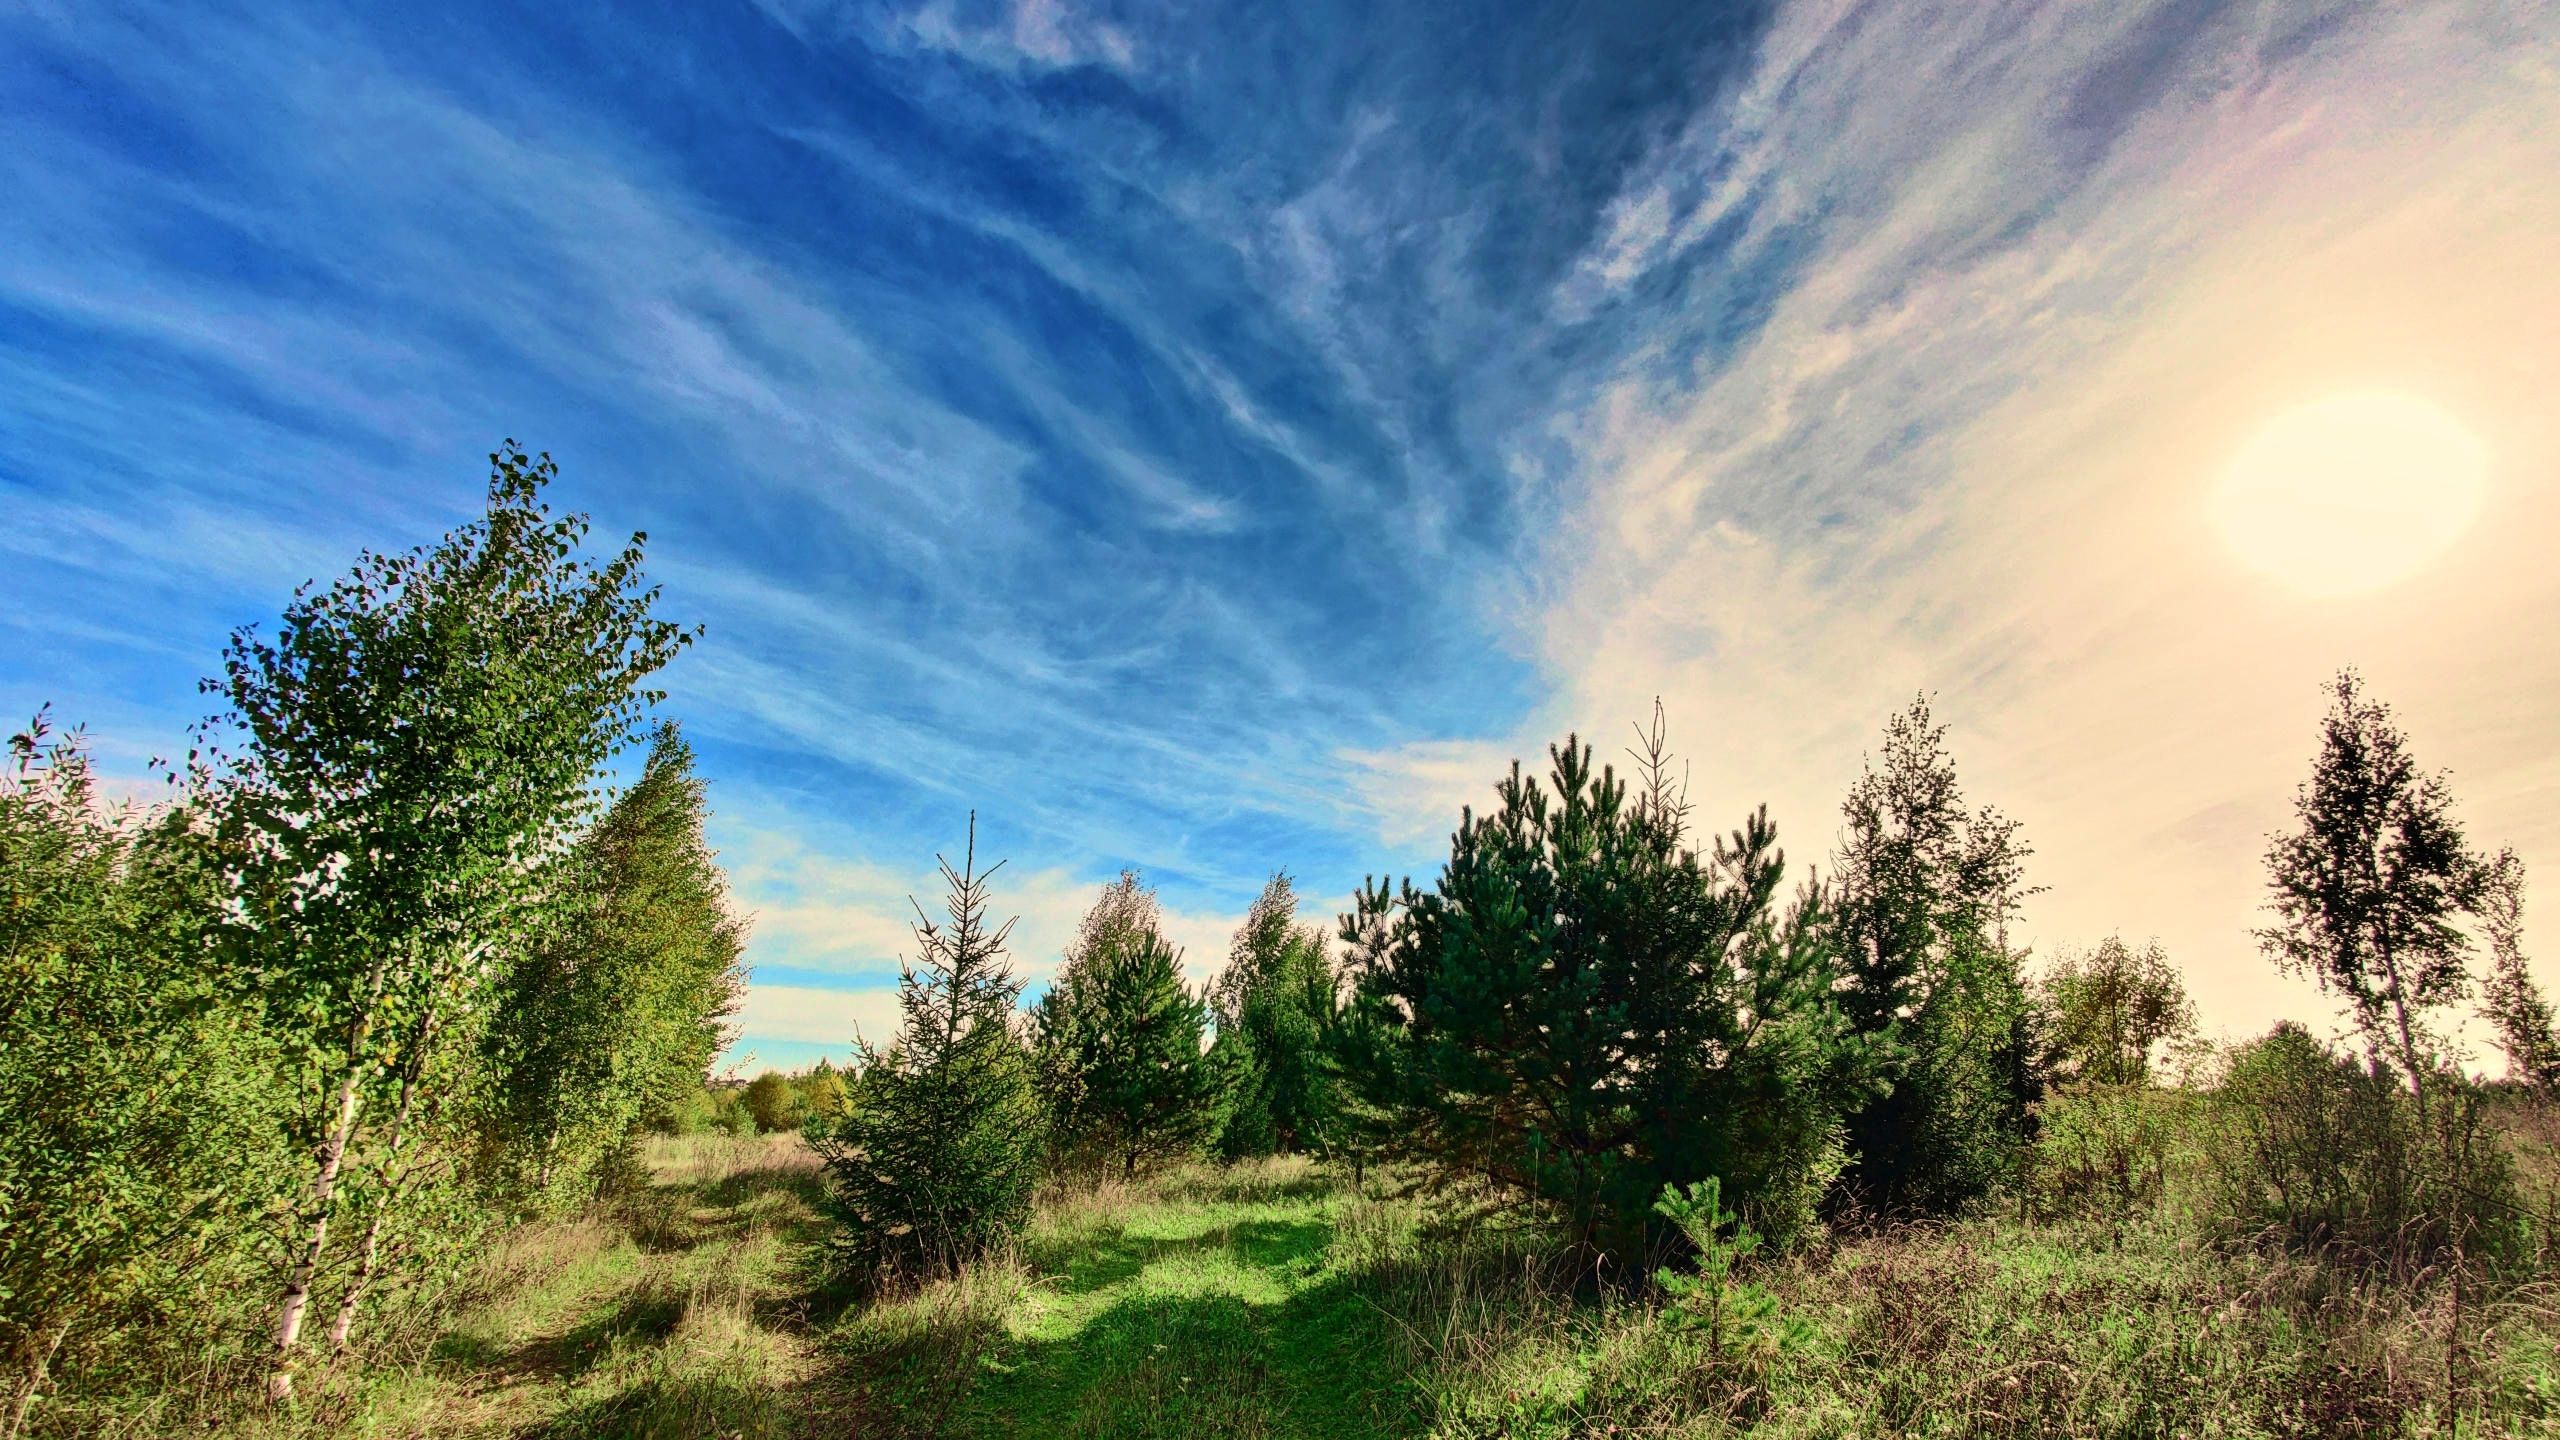 General 2560x1440 landscape morning sky outdoors trees grass panorama wide angle clouds